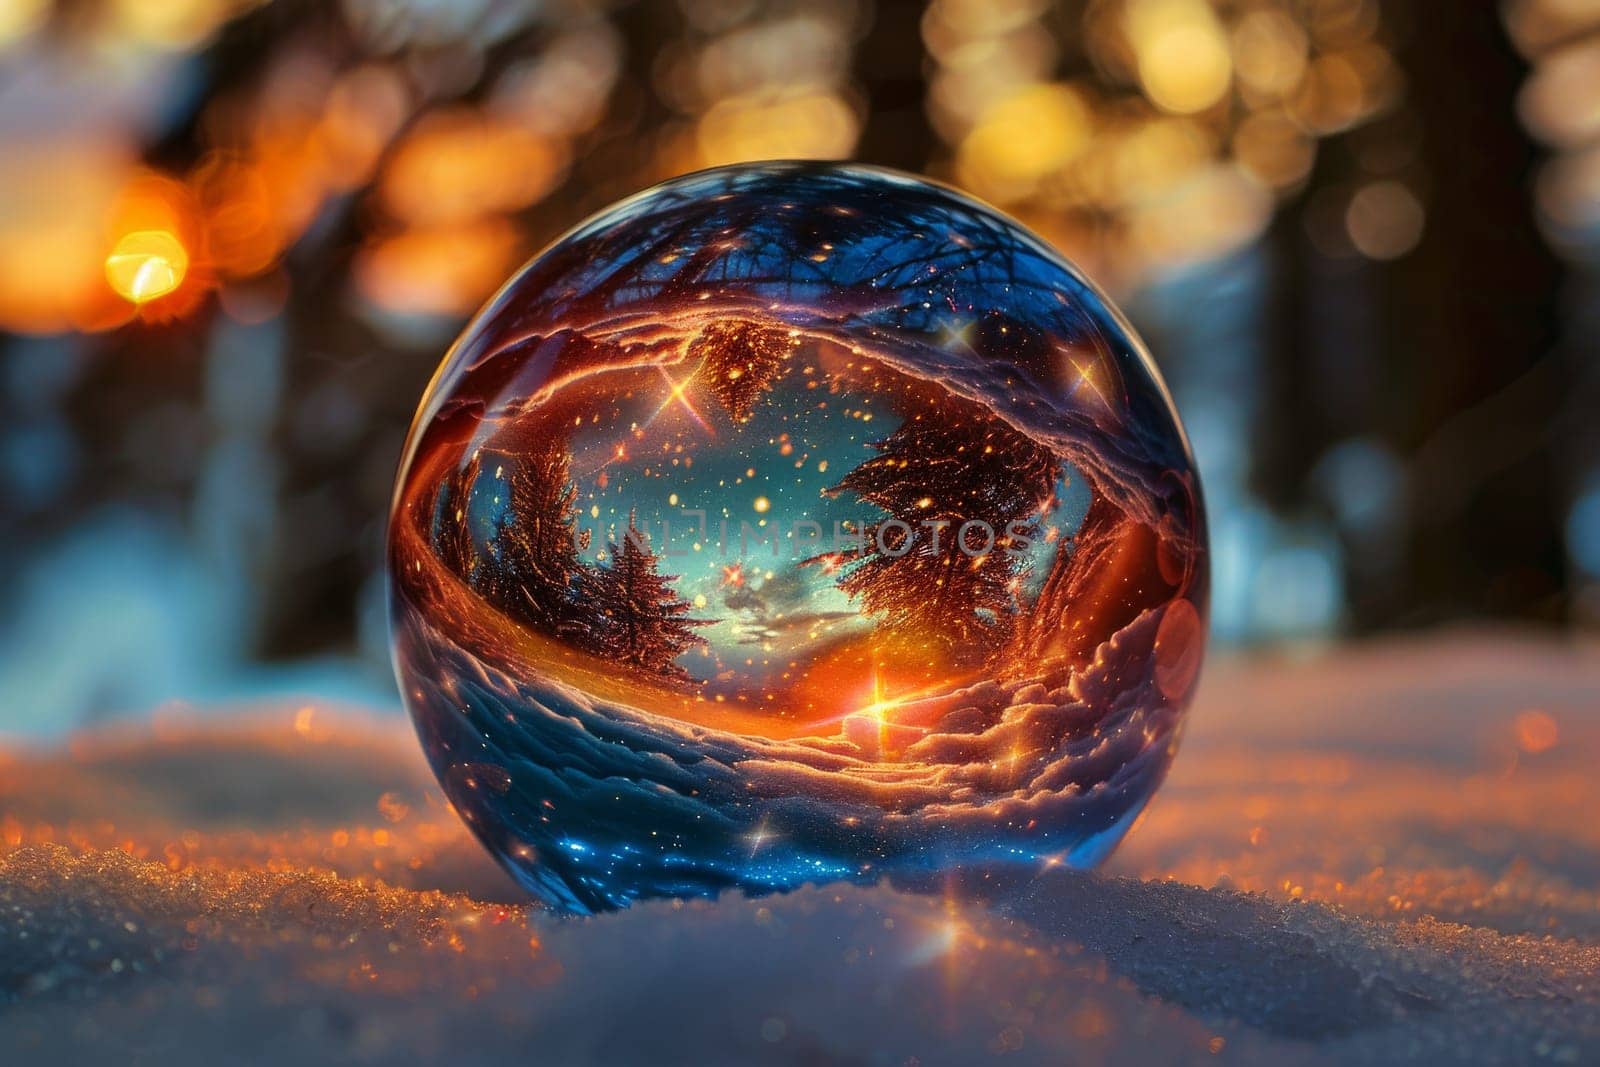 A glass ball with a reflection of a forest and a sunset. The ball is surrounded by snow and the reflection of the trees and the sky creates a serene and peaceful atmosphere